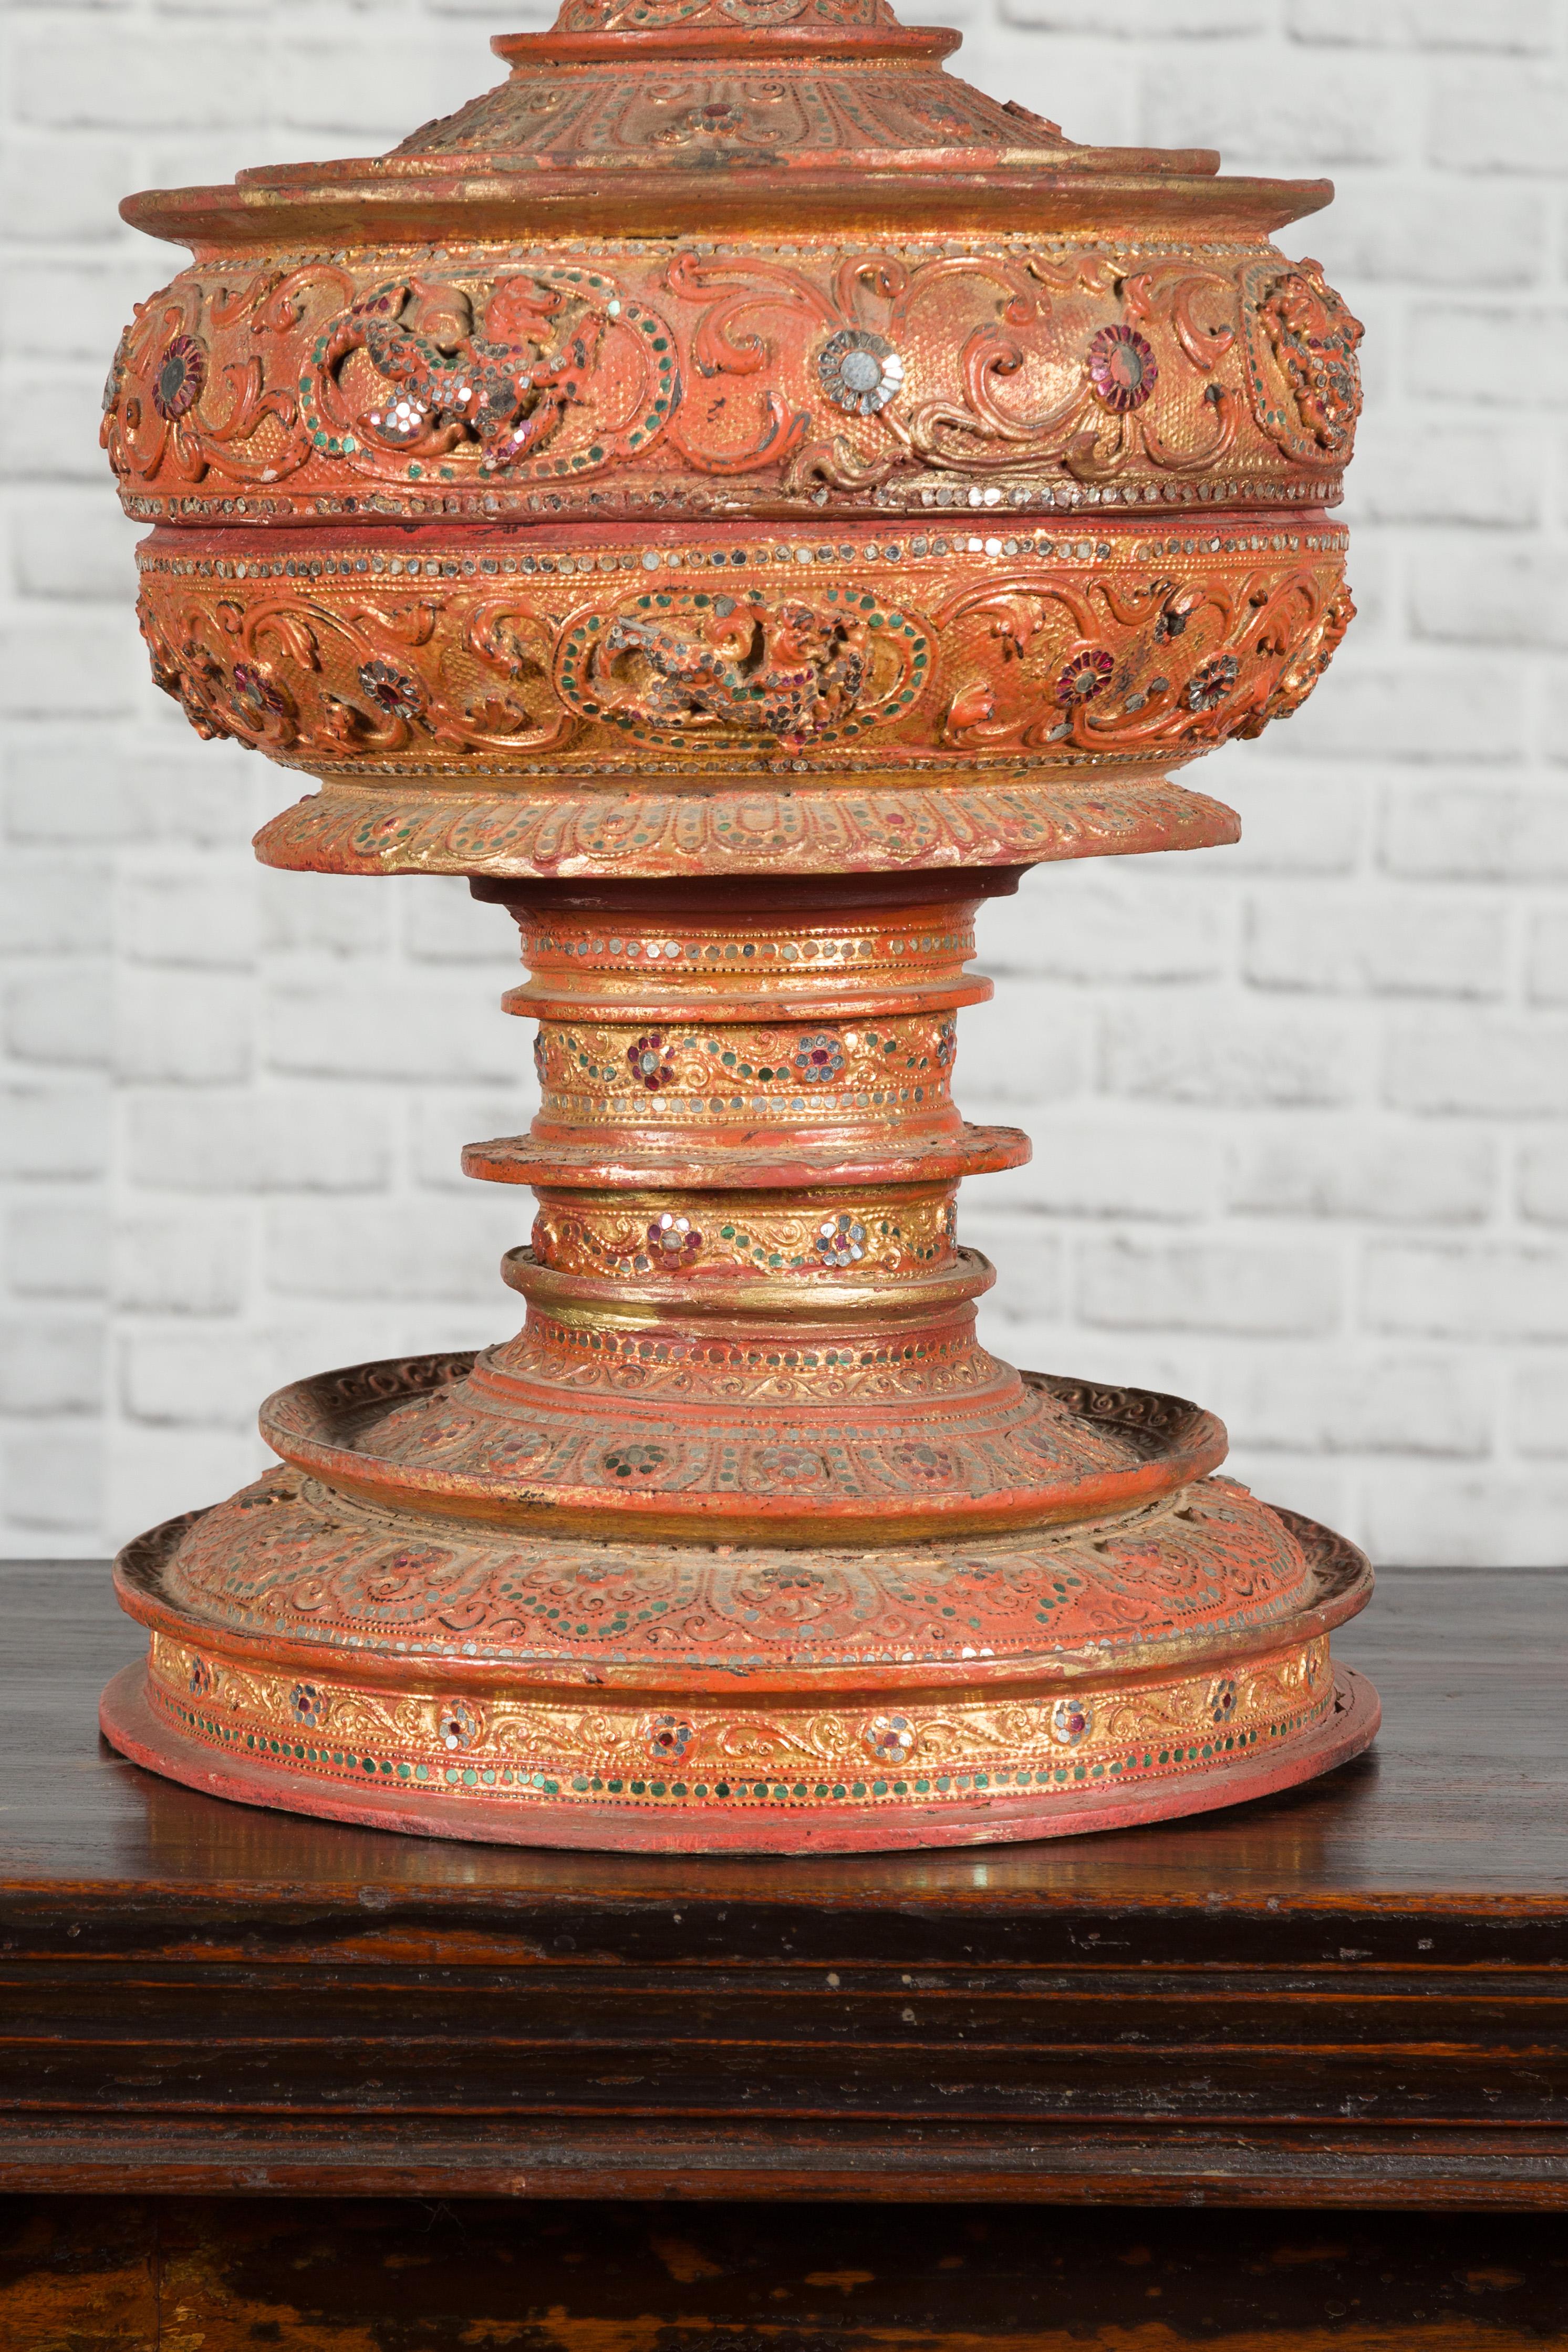 Antique Burmese Carved Teak Lidded Offering Bowl with Inlaid and Gilt Decor 4